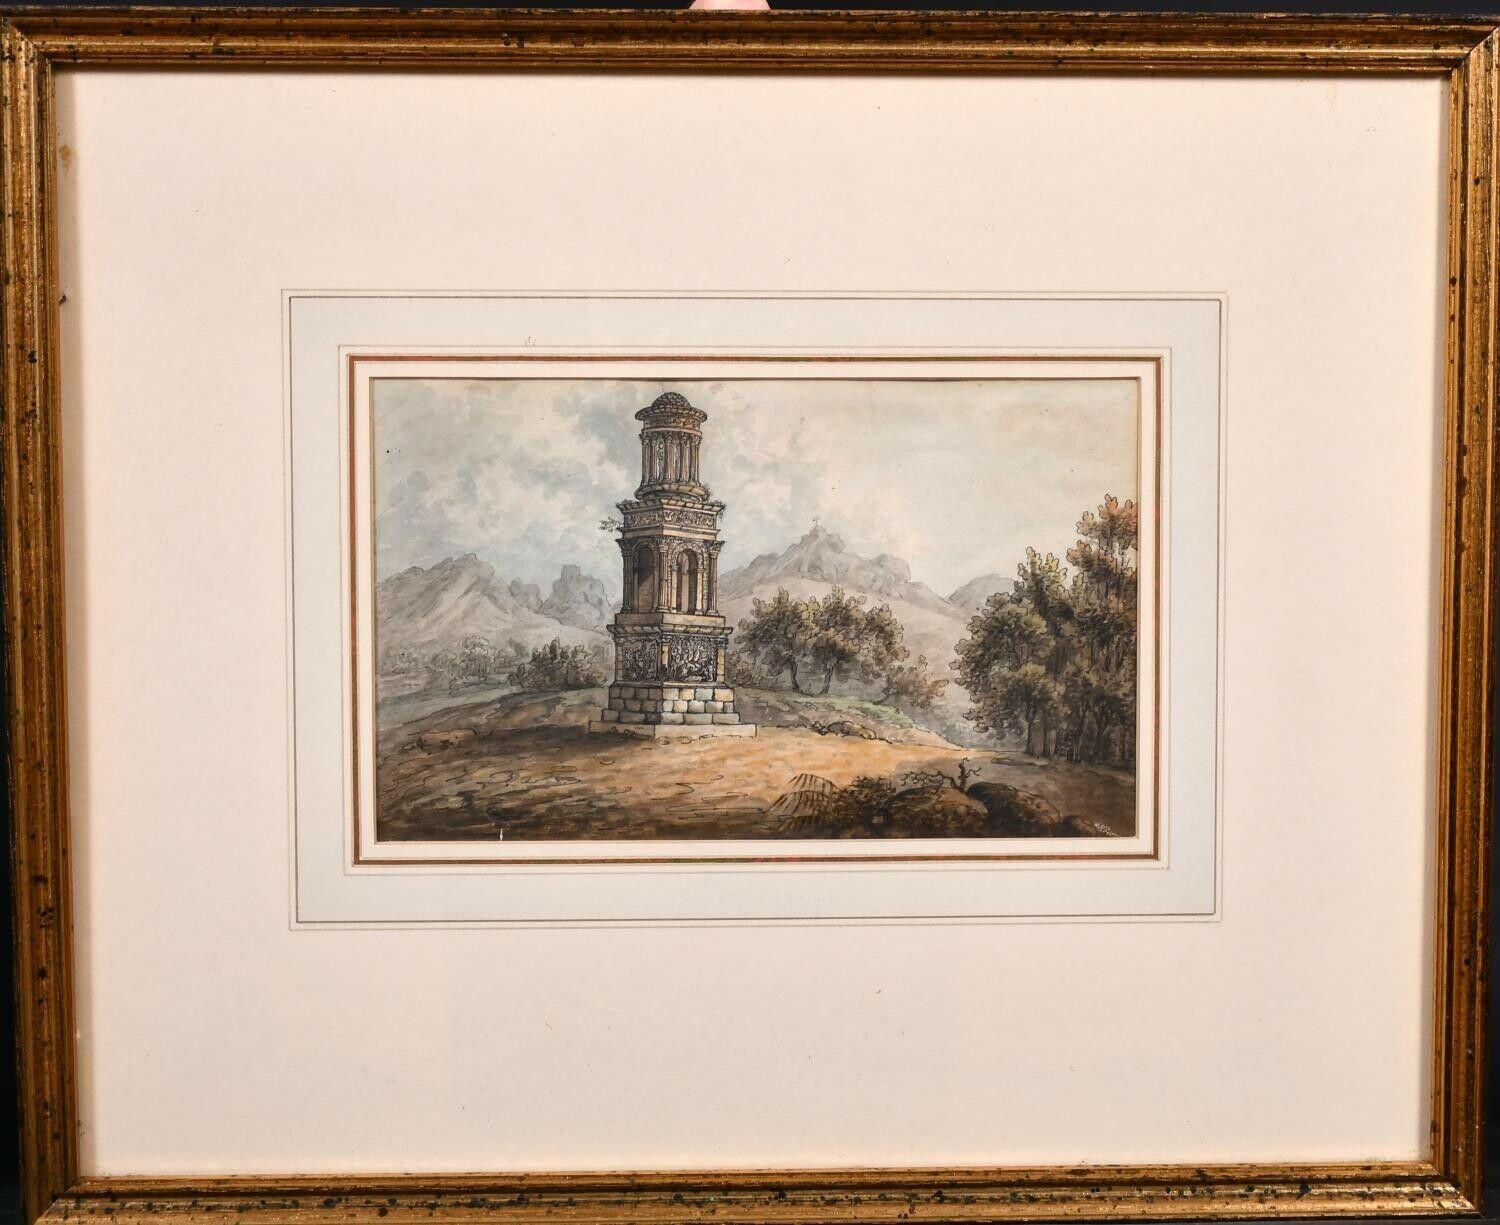 18th CENTURY FRENCH GRAND TOUR WATERCOLOUR - ROMAN MONUMENT ST. REMY PROVENCE - Painting by French Artist